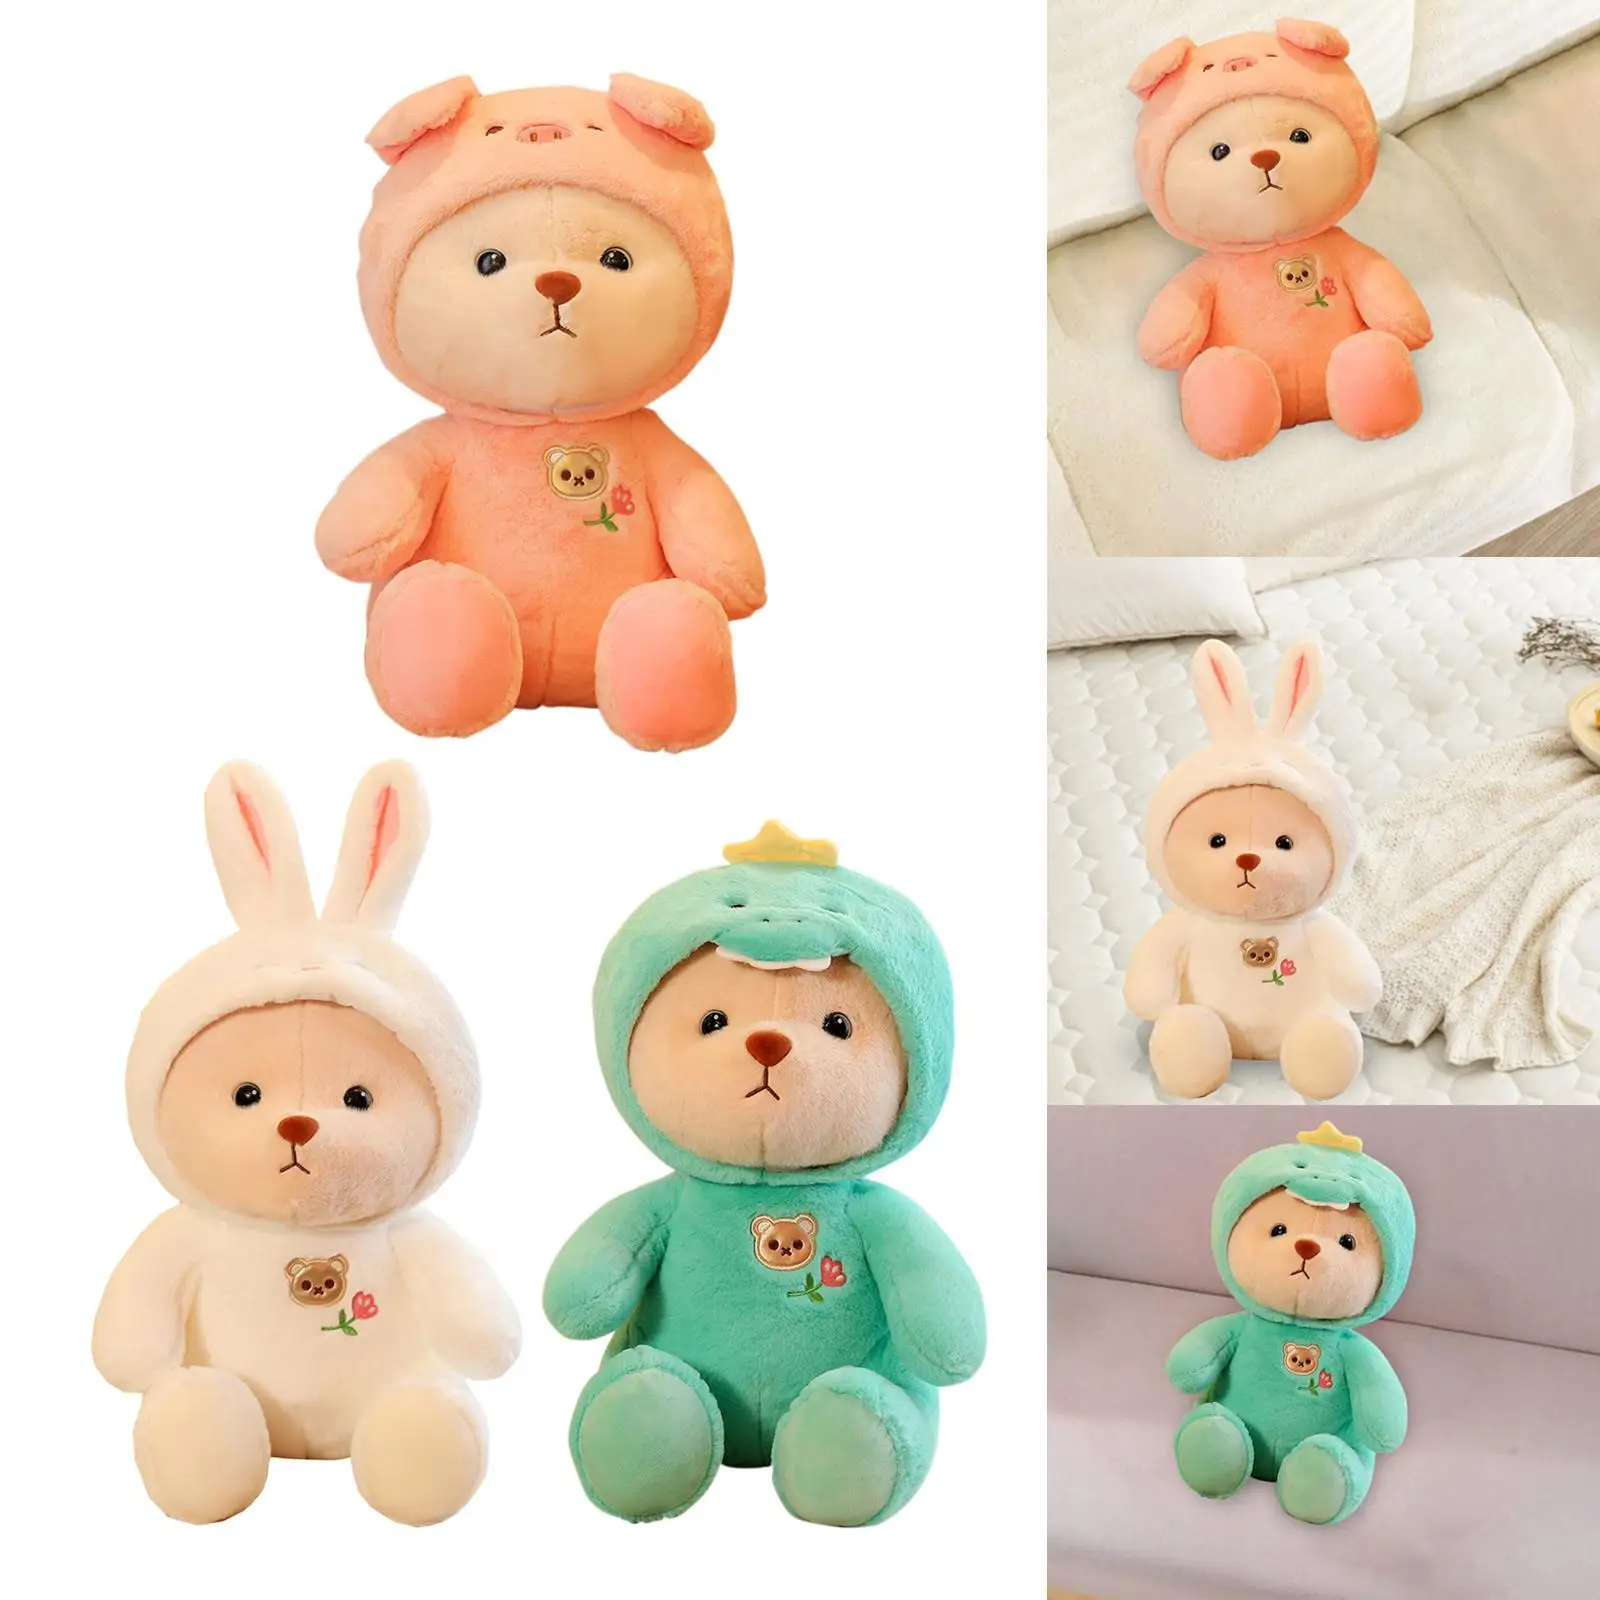 Cute Animal Plush Toys Birthday Gifts Soft Pillow for Adults Boys Girls Kids